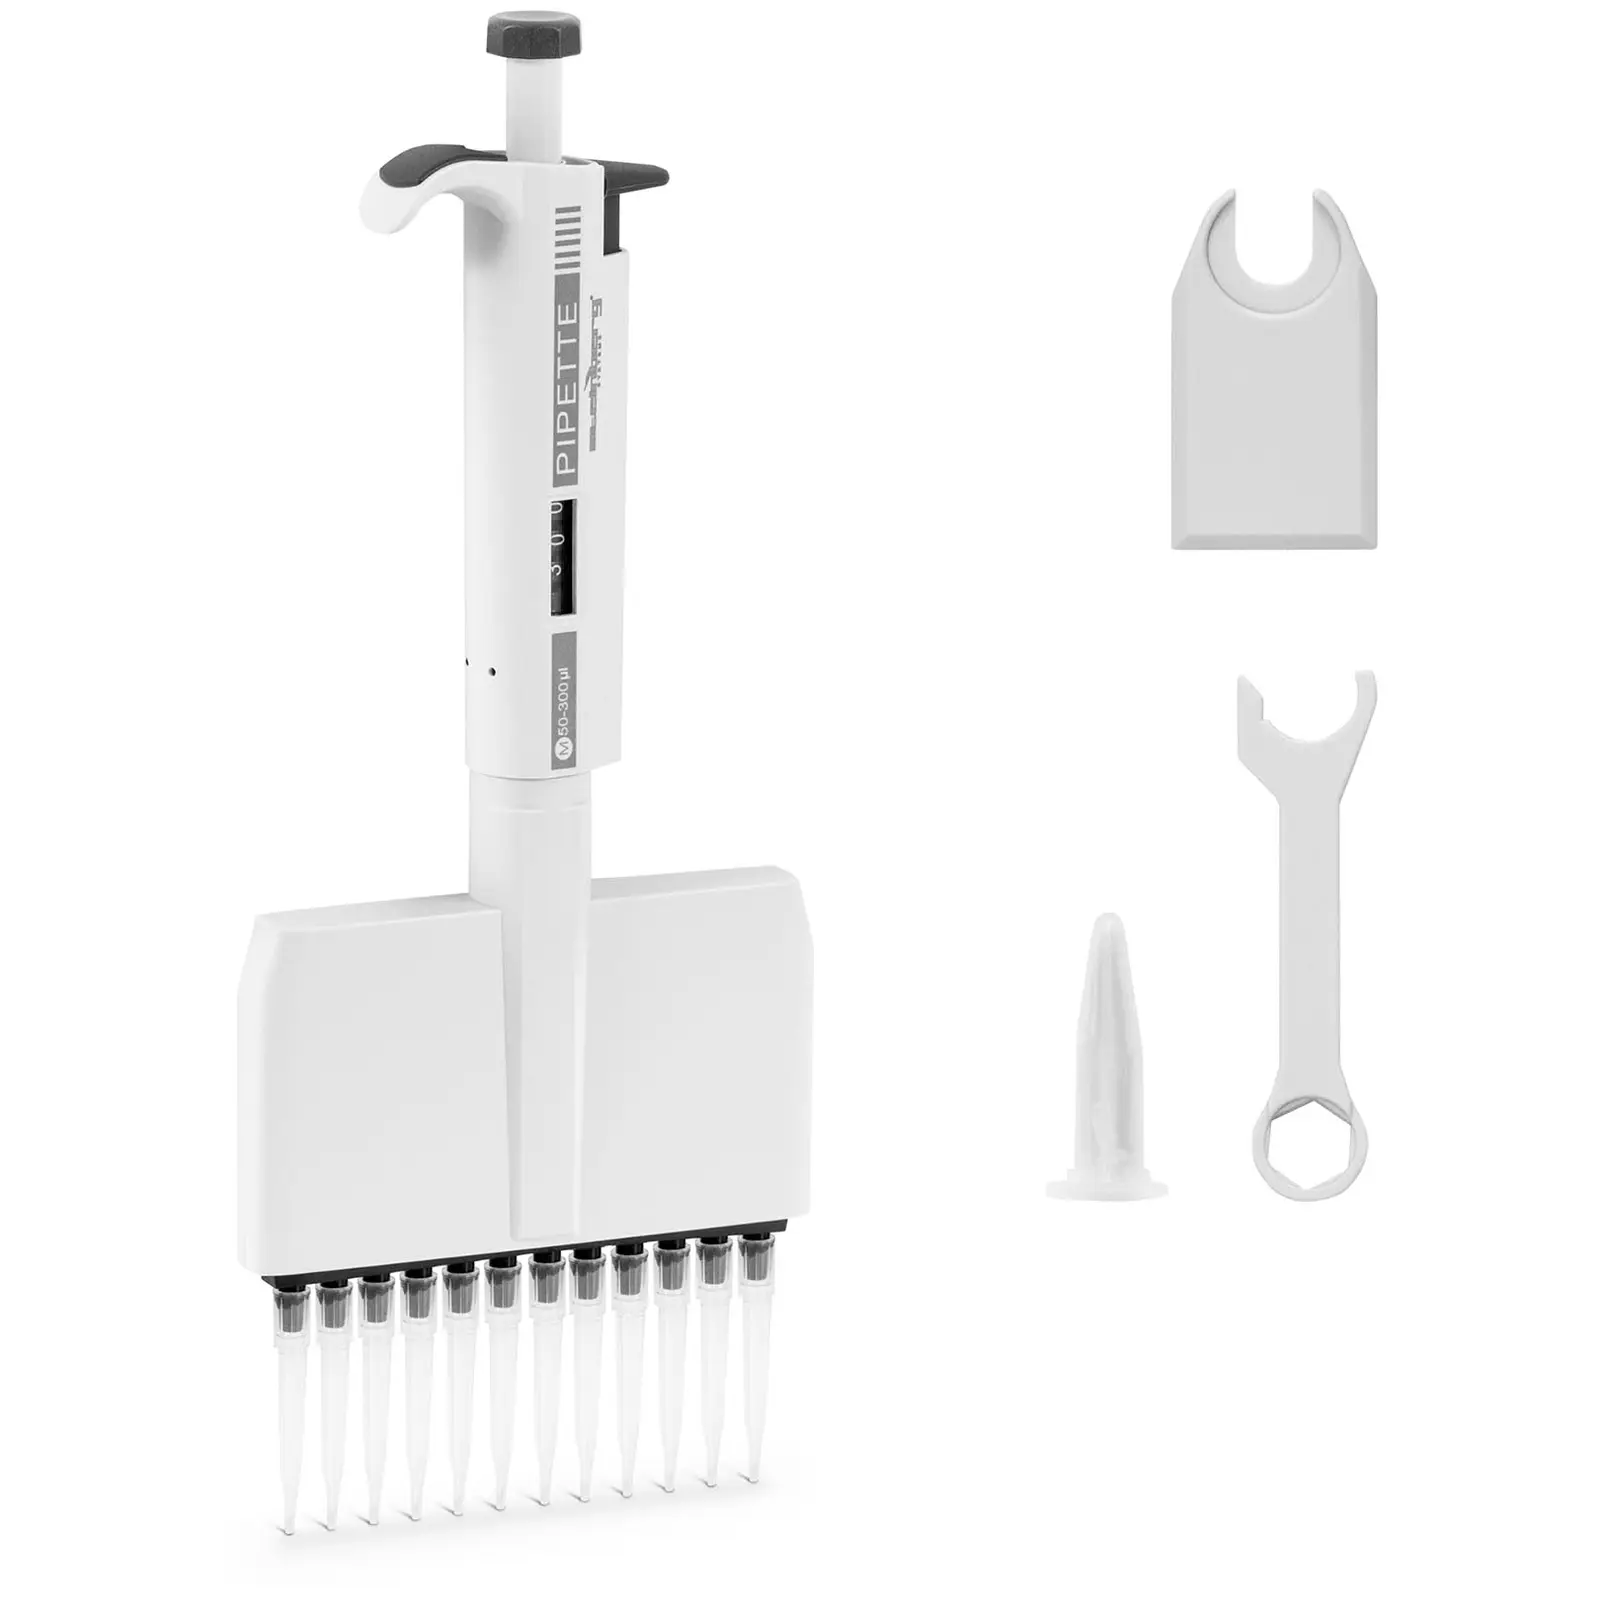 Multichannel pipette - for 12 tips - 0,05 - 0,3 ml